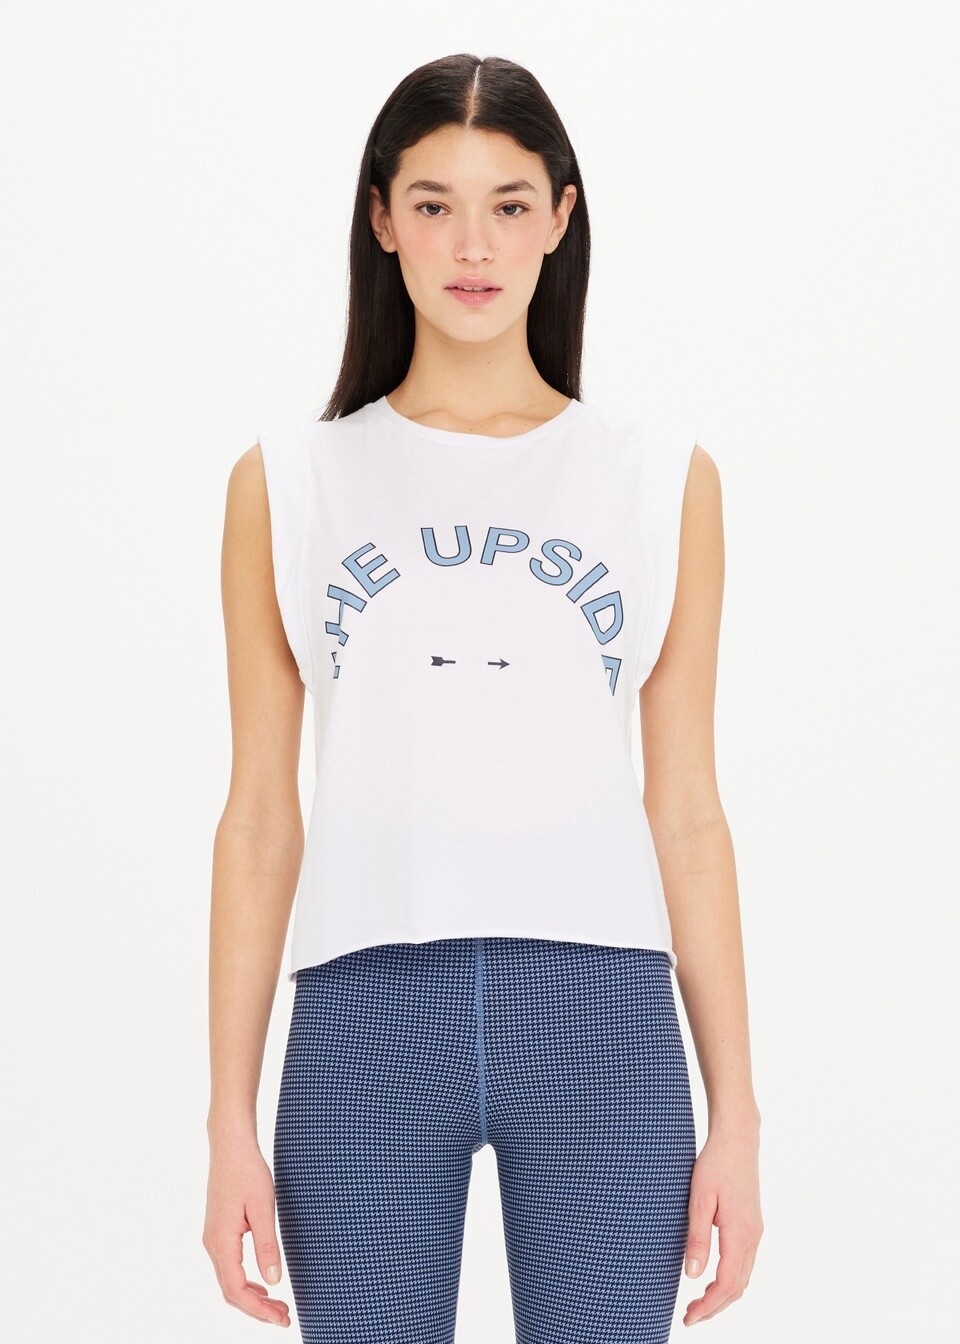 The Upside, Cropped Muscle Tank